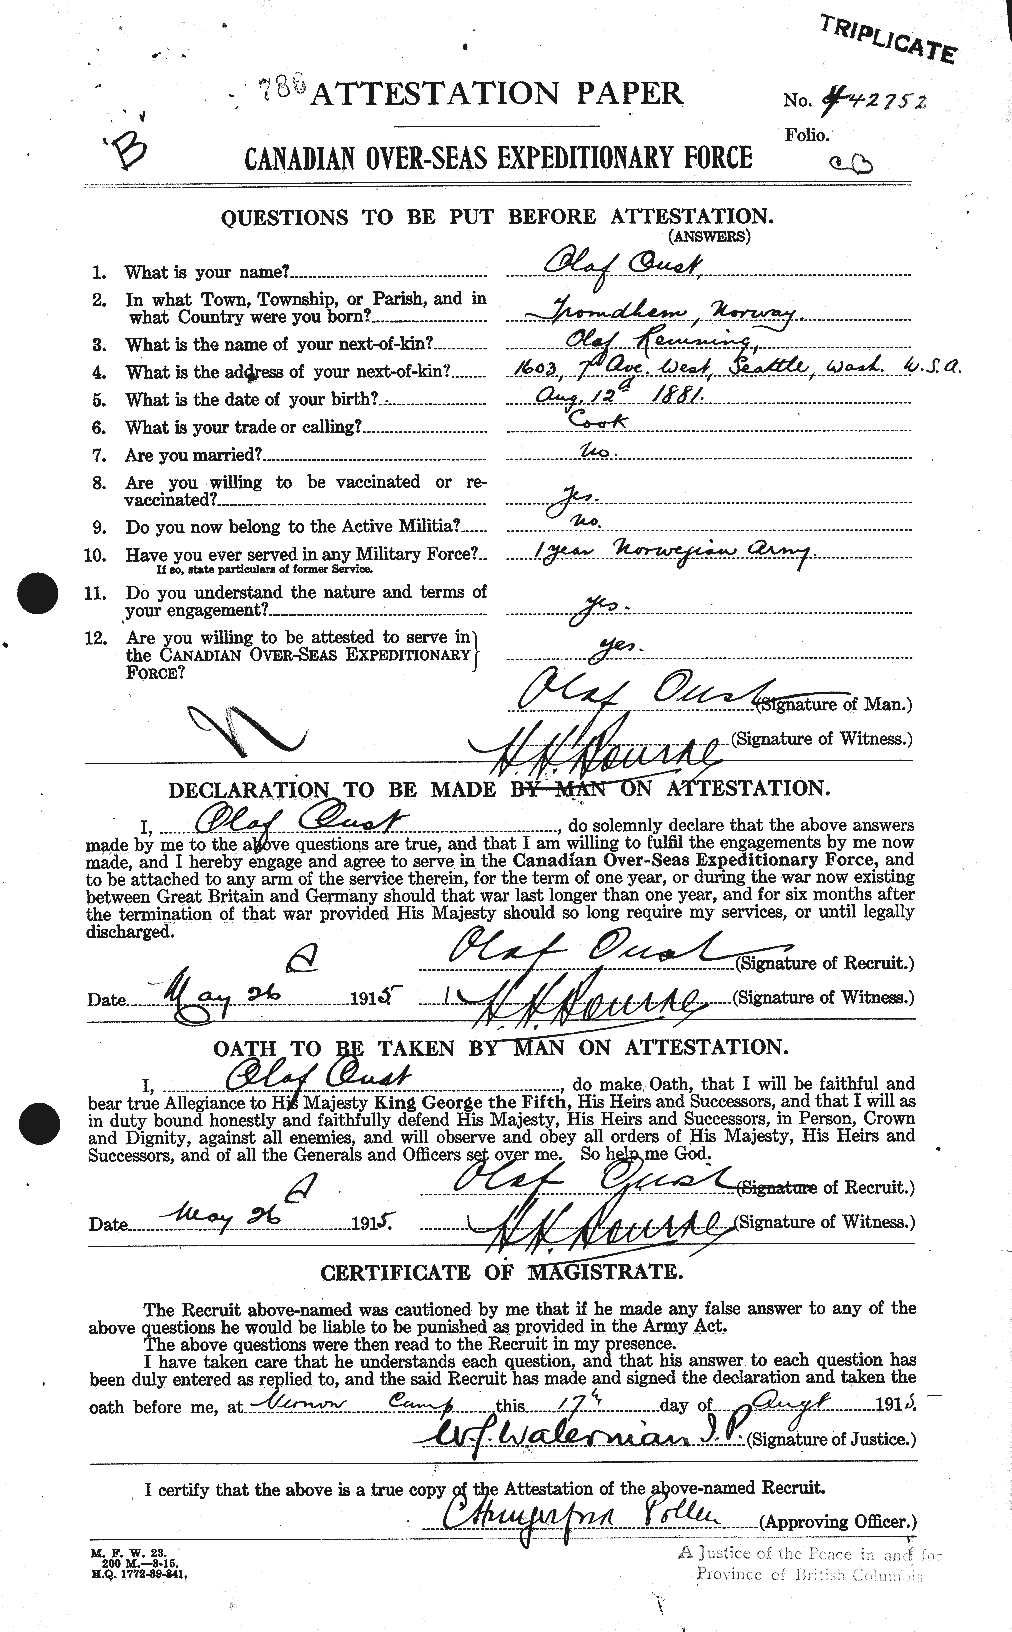 Personnel Records of the First World War - CEF 560991a